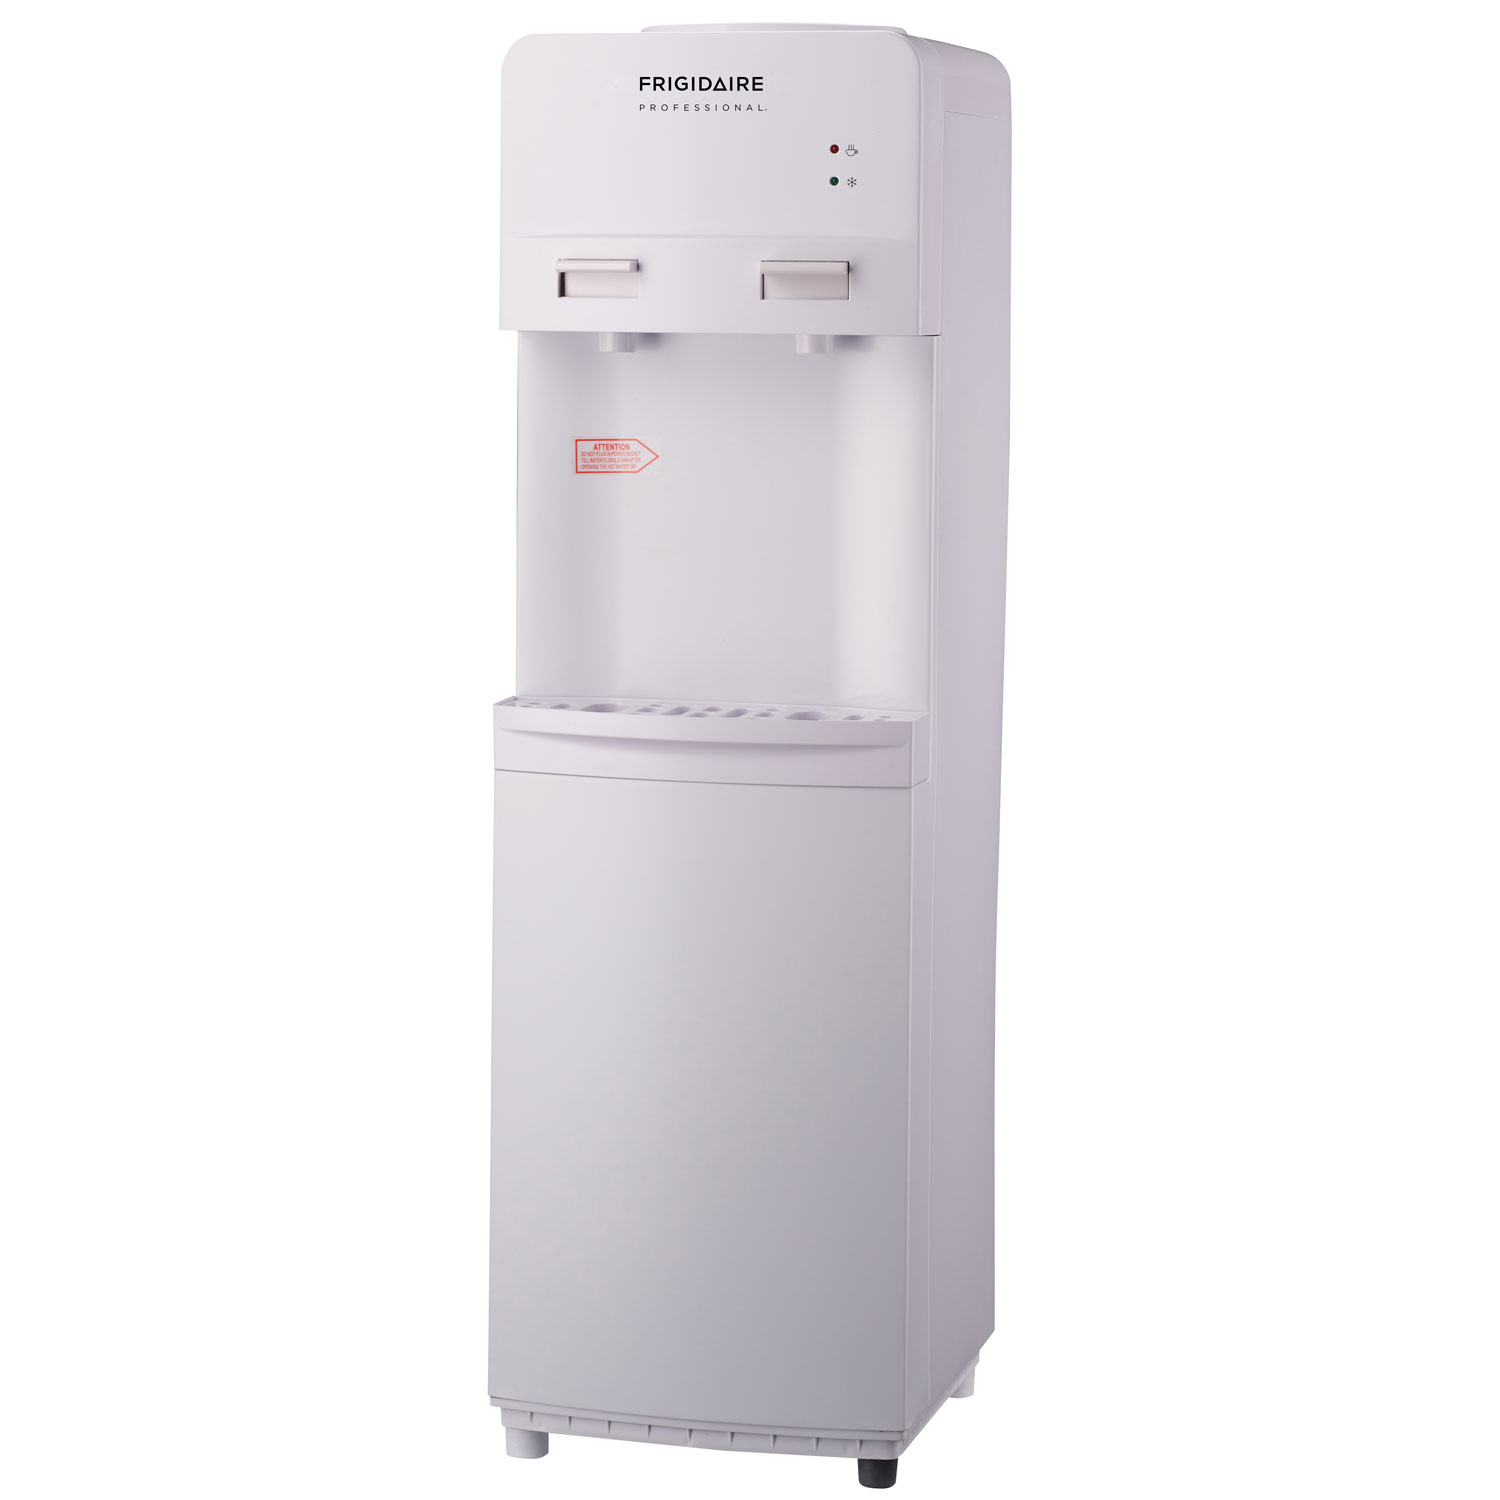 Frigidaire Professional Hot/Cold Water Cooler (FXWC109) - White - Only at Best Buy